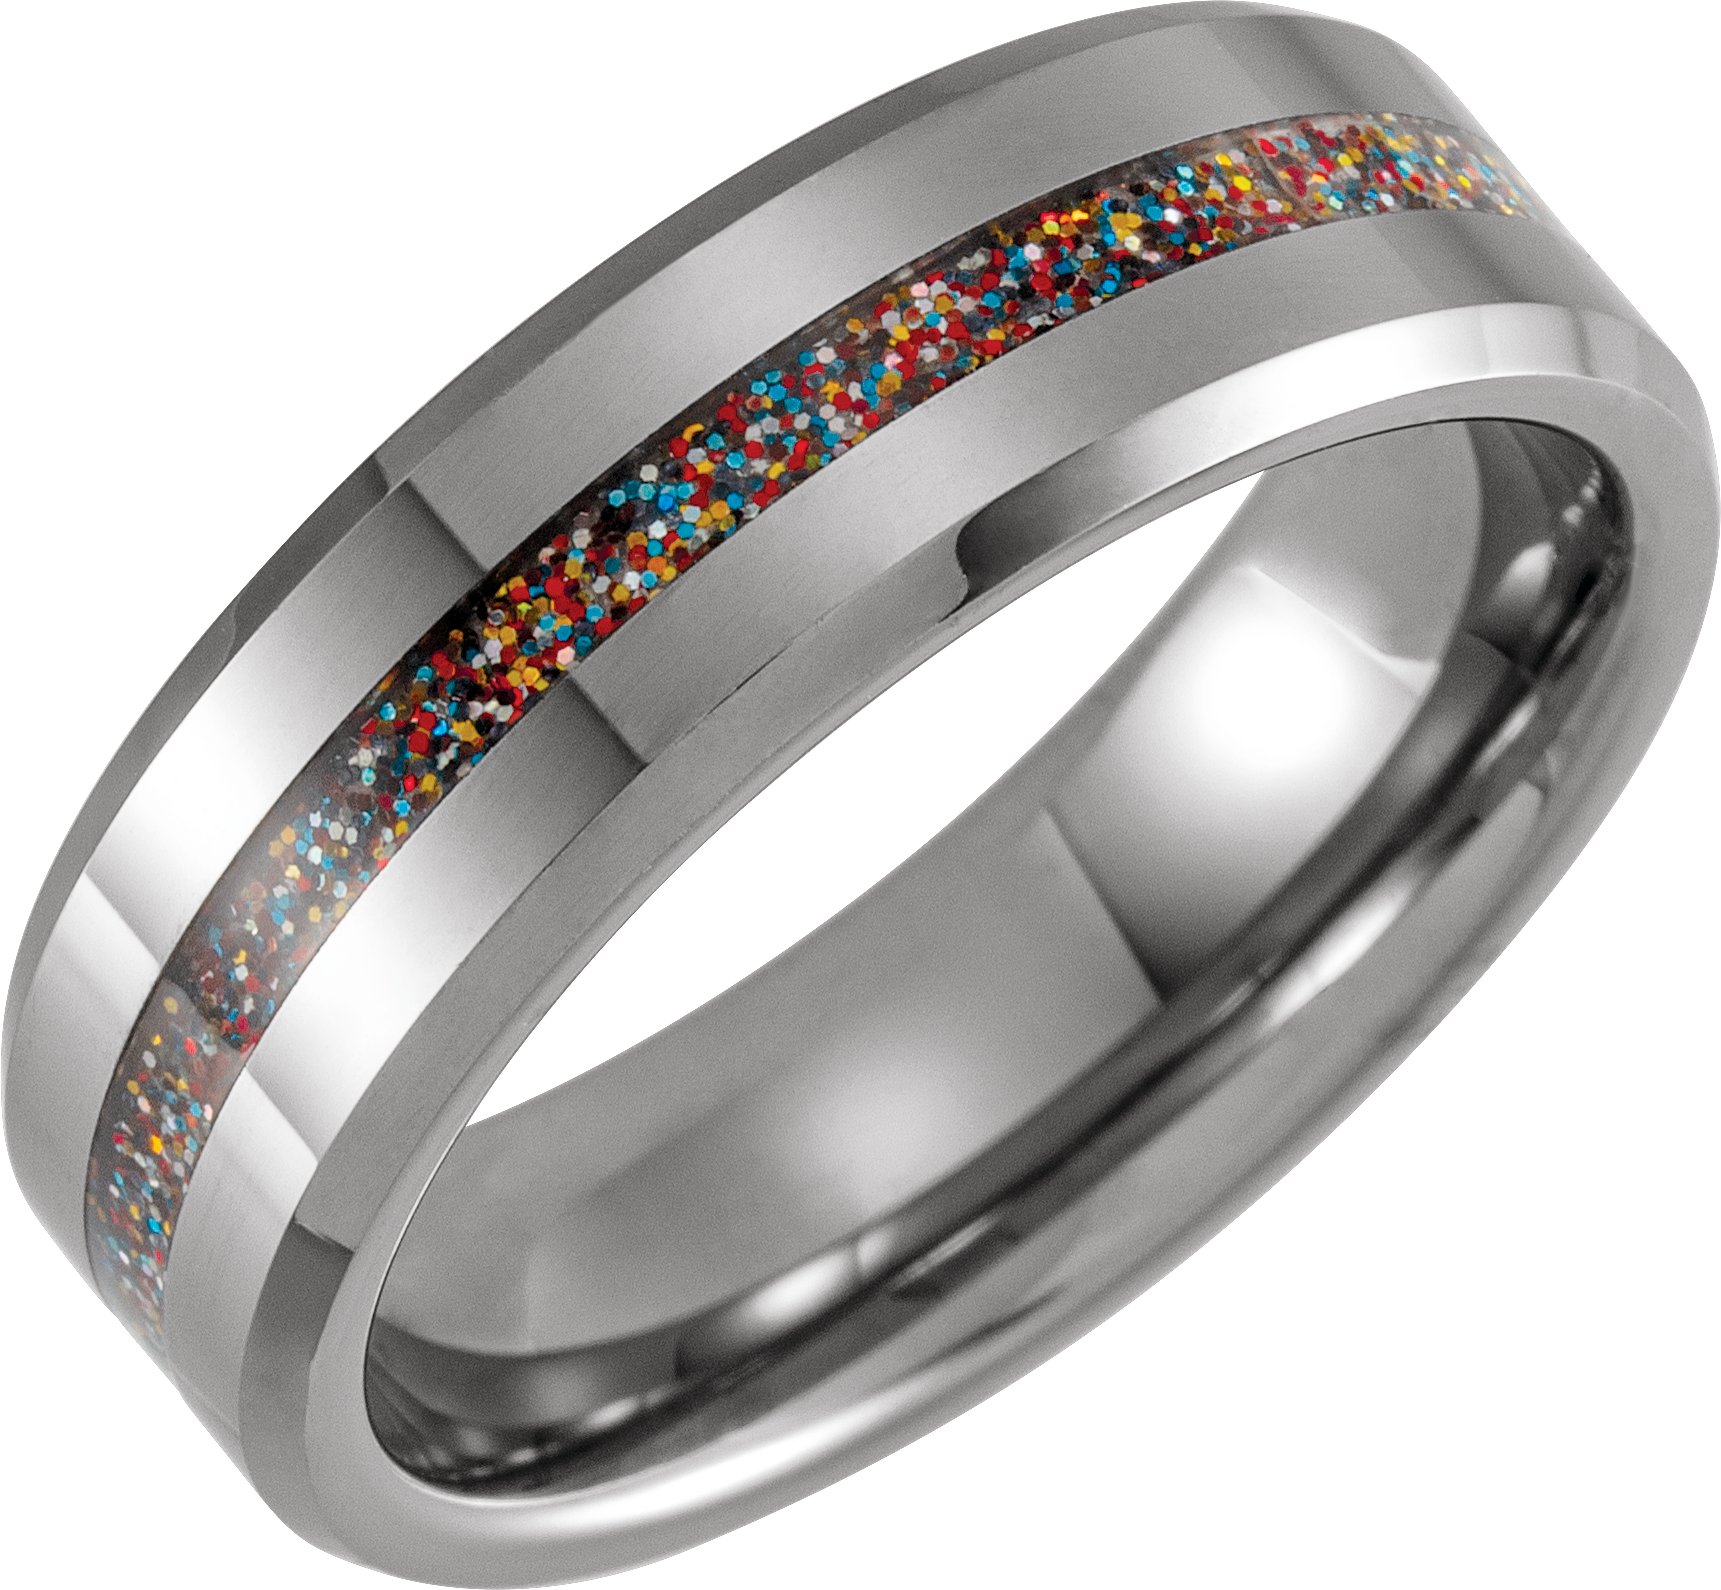 Tungsten 8 mm Beveled Band with Color Chip Inlay Size 13.5